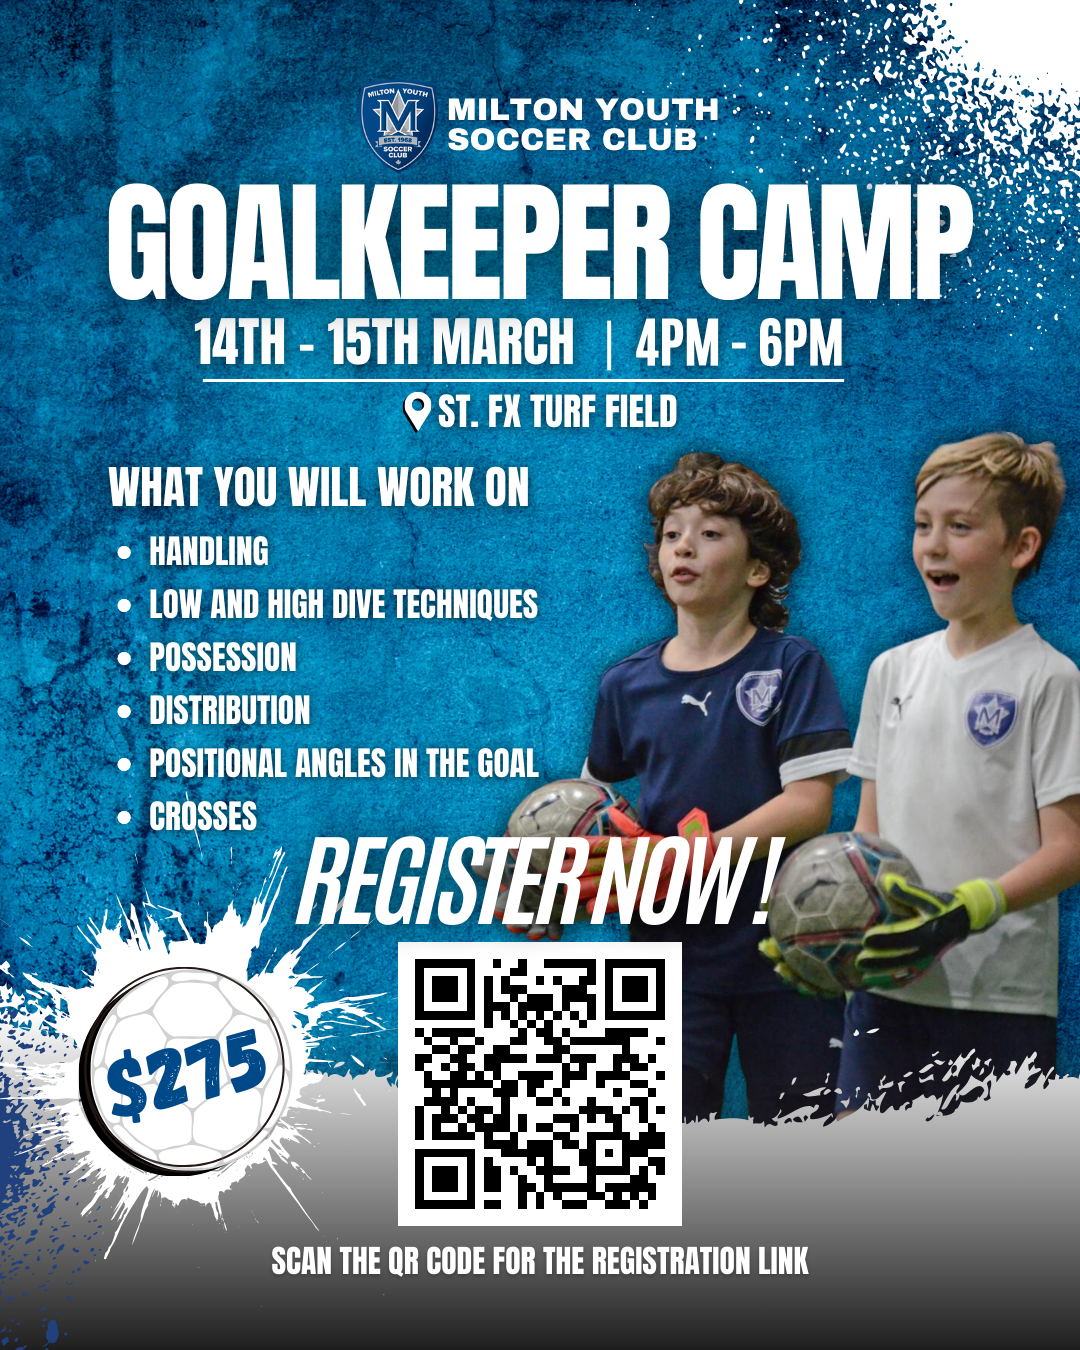 Goalkeeper Camp Coming to Milton Youth Soccer Club this March Break featured image